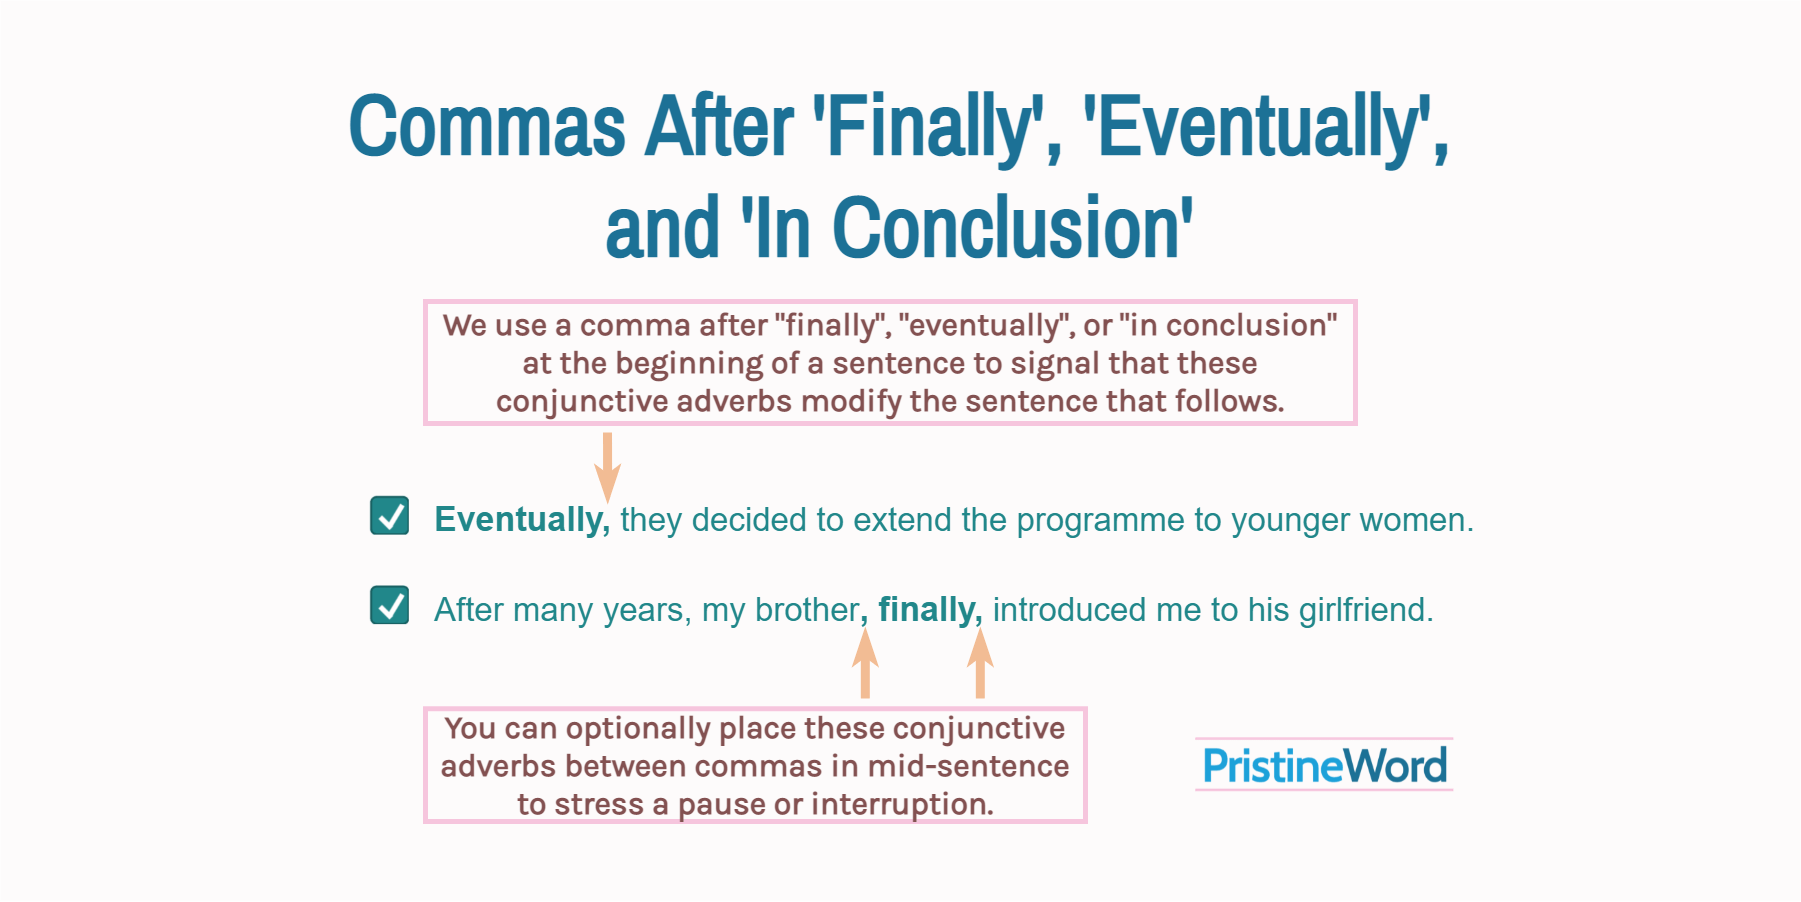 Commas After 'Finally', 'Eventually', and 'In Conclusion'